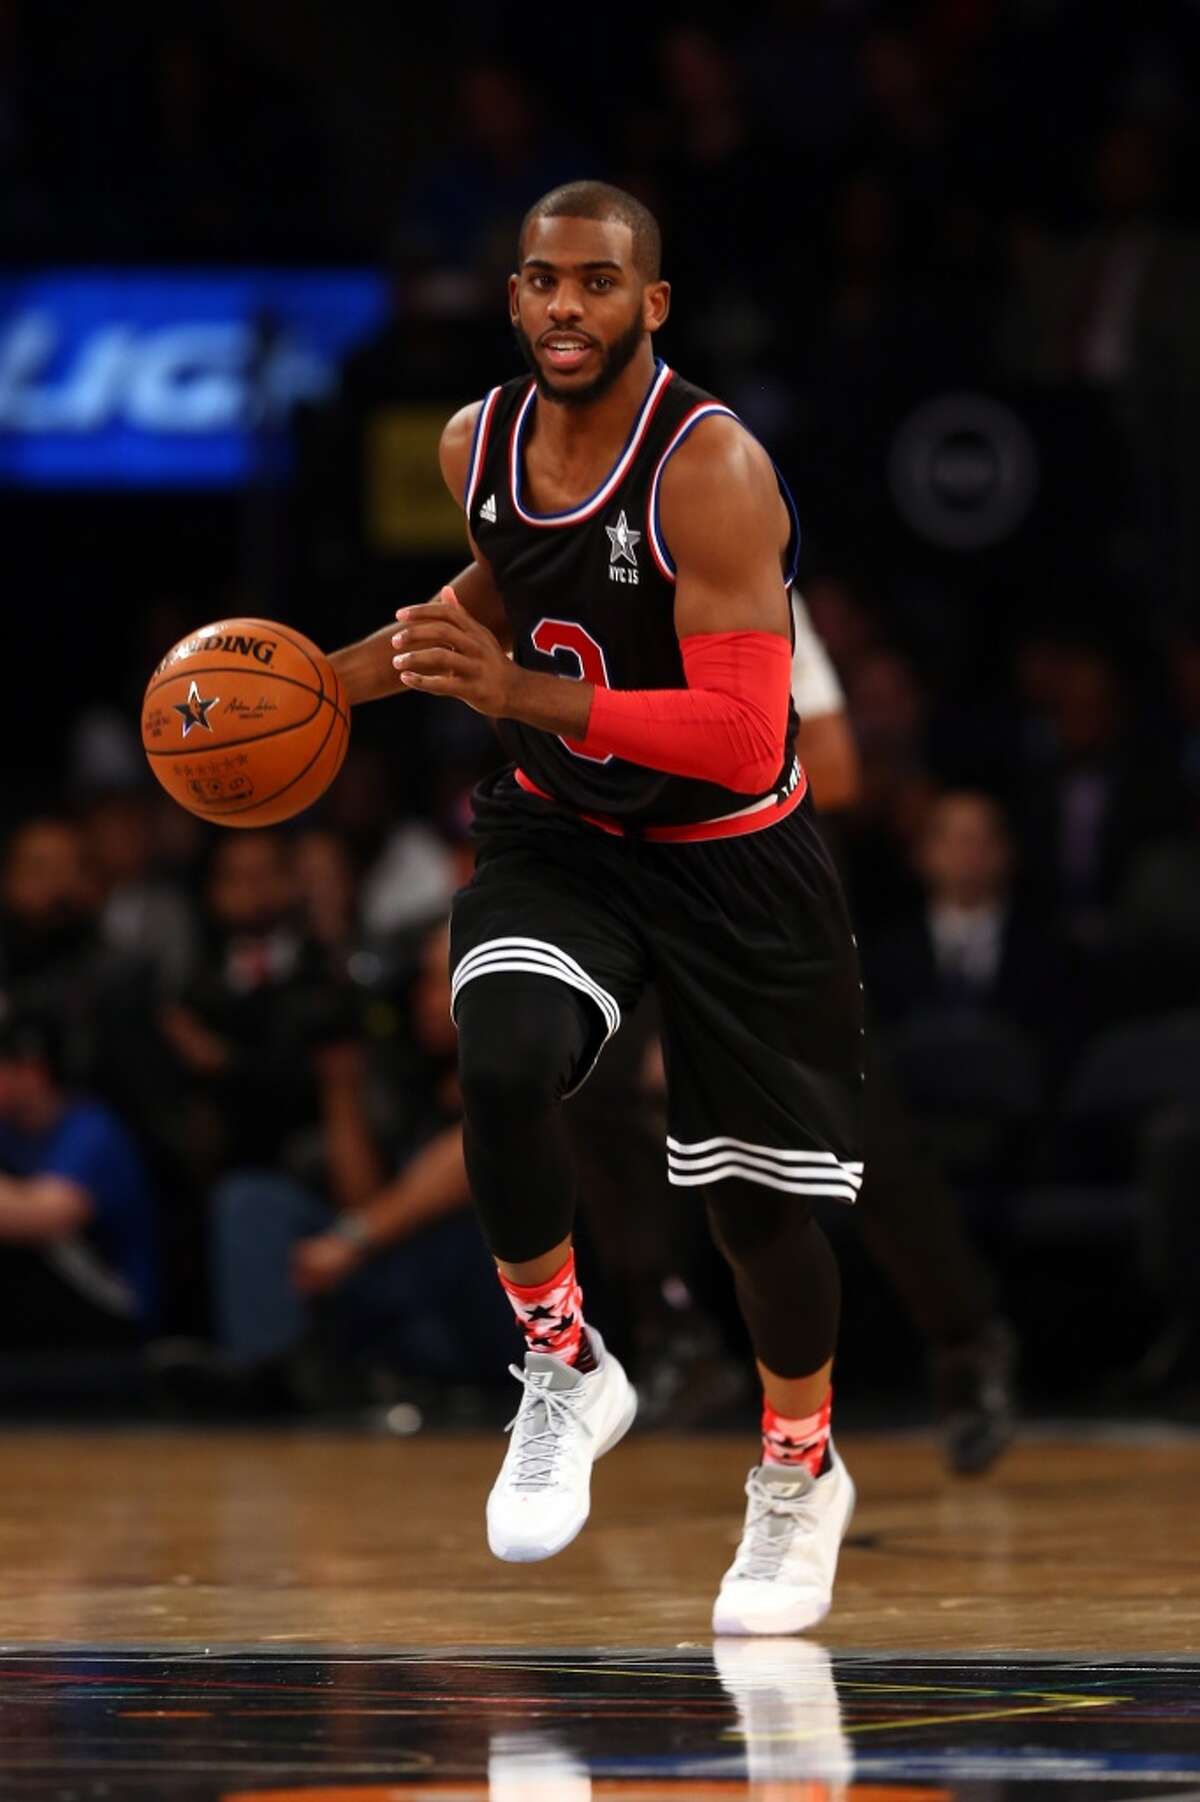 NEW YORK, NY - FEBRUARY 15: Chris Paul #3 of the Los Angeles Clippers and the Western Conference dribbles the ball during the 2015 NBA All-Star Game at Madison Square Garden on February 15, 2015 in New York City. NOTE TO USER: User expressly acknowledges and agrees that, by downloading and/or using this photograph, user is consenting to the terms and conditions of the Getty Images License Agreement. (Photo by Elsa/Getty Images)